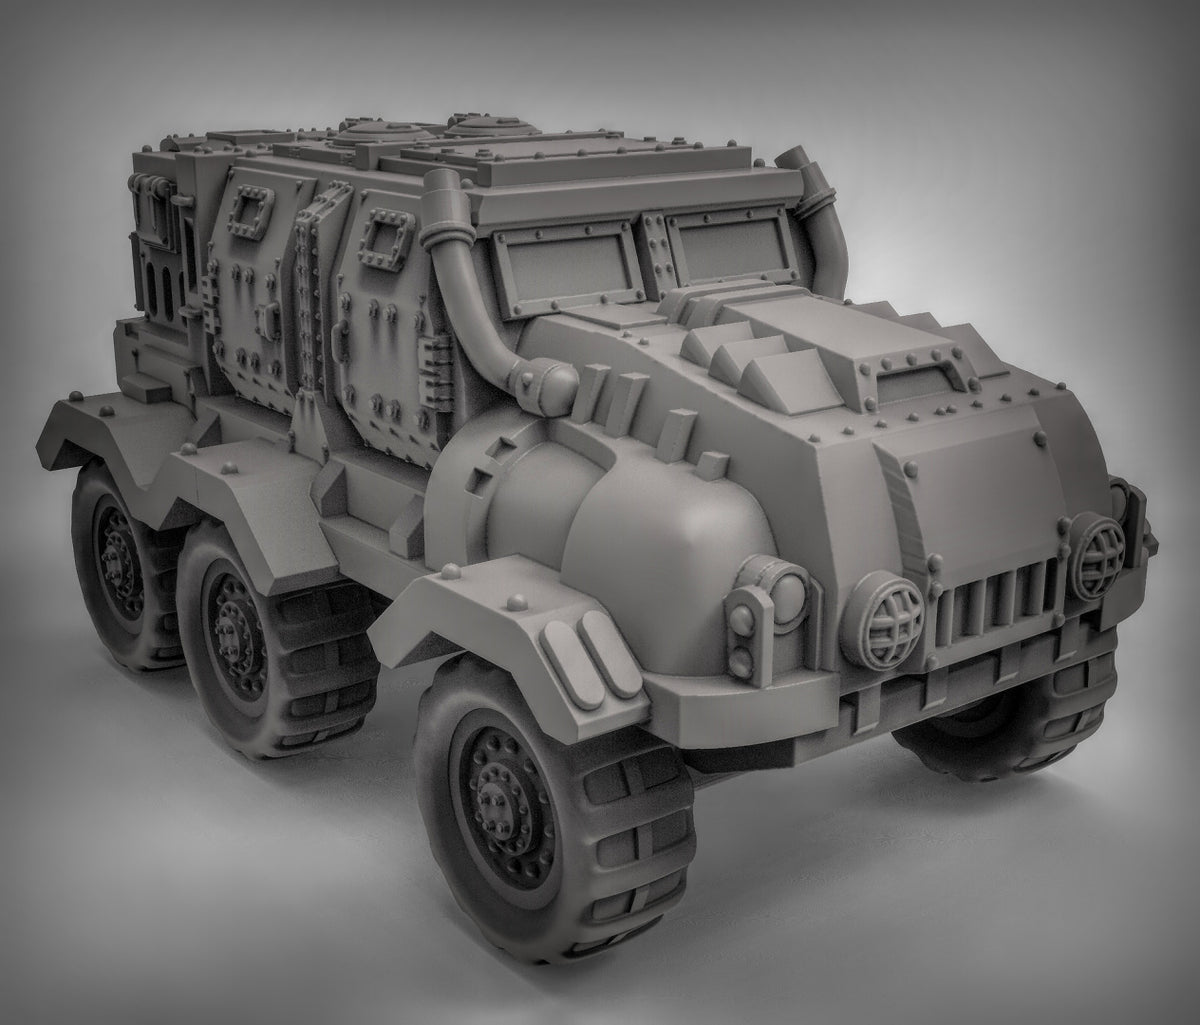 Buggy Patrol Vehicle APC - Tank Collection for 28mm Miniature Wargames & Terrain